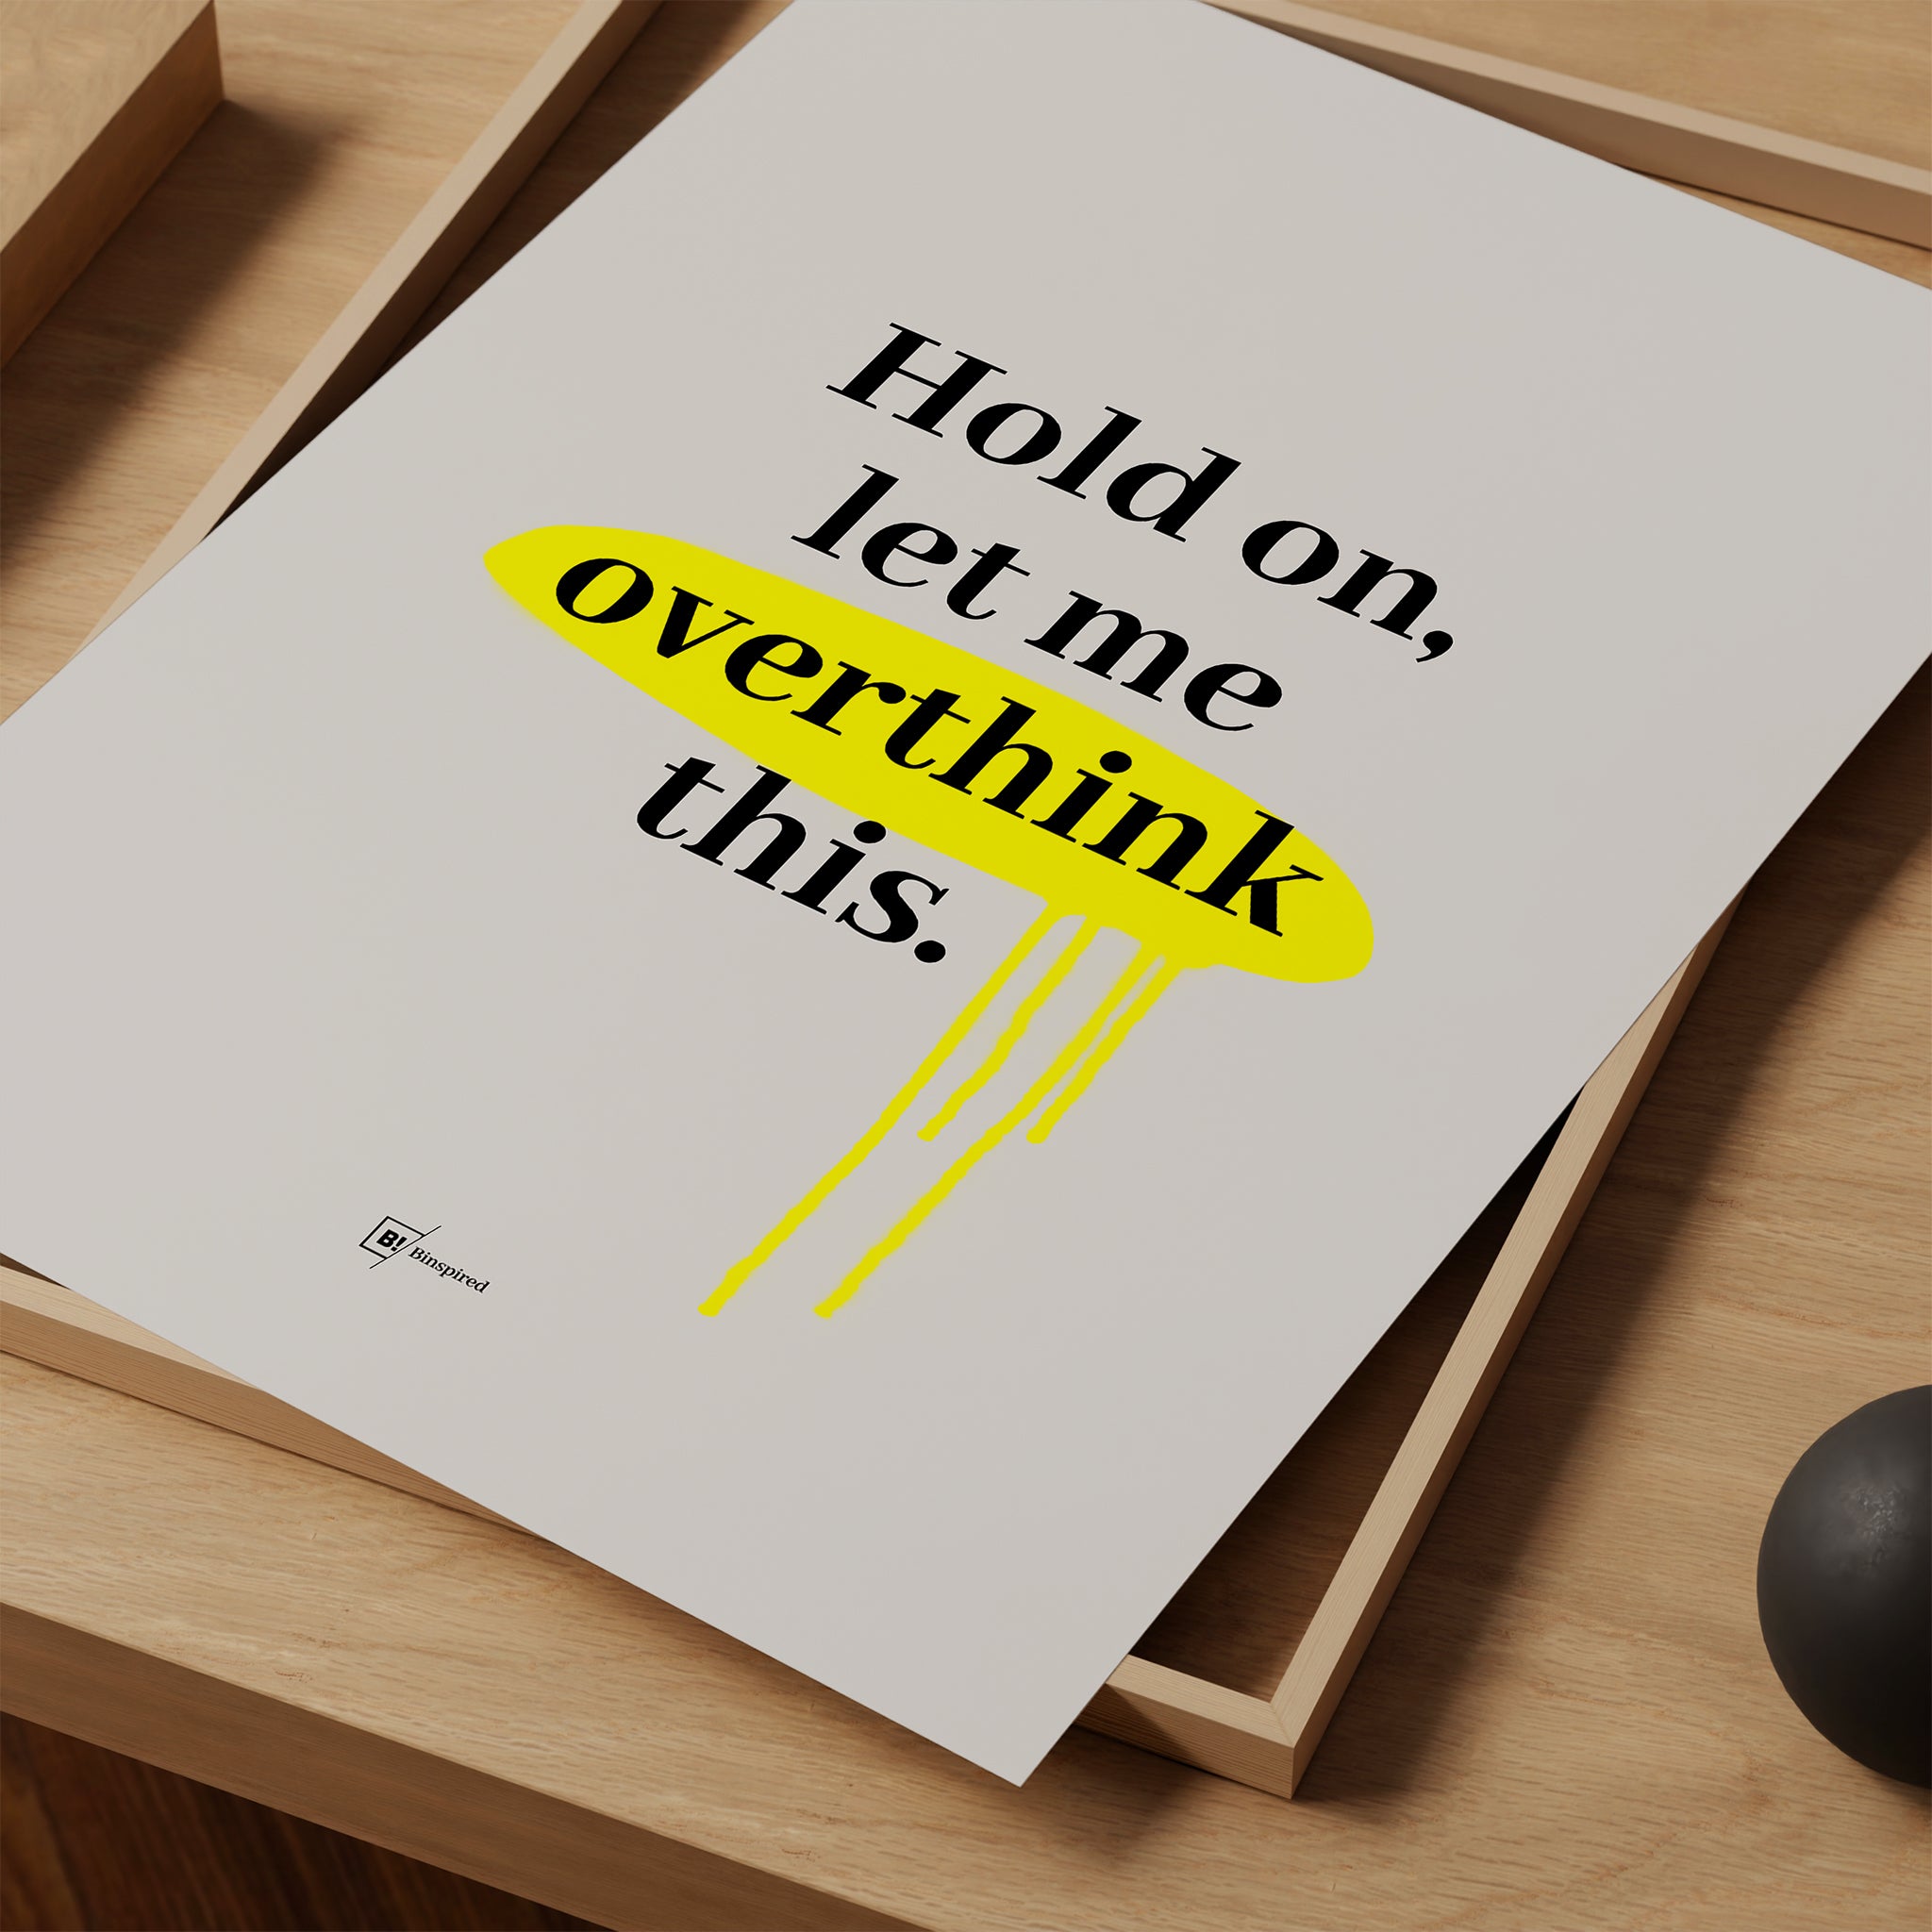 Be inspired by our "Hold on, let me overthink this" quote art print! This artwork was printed using giclée on archival acid-free paper and is presented as a print close-up that captures its timeless beauty in every detail.